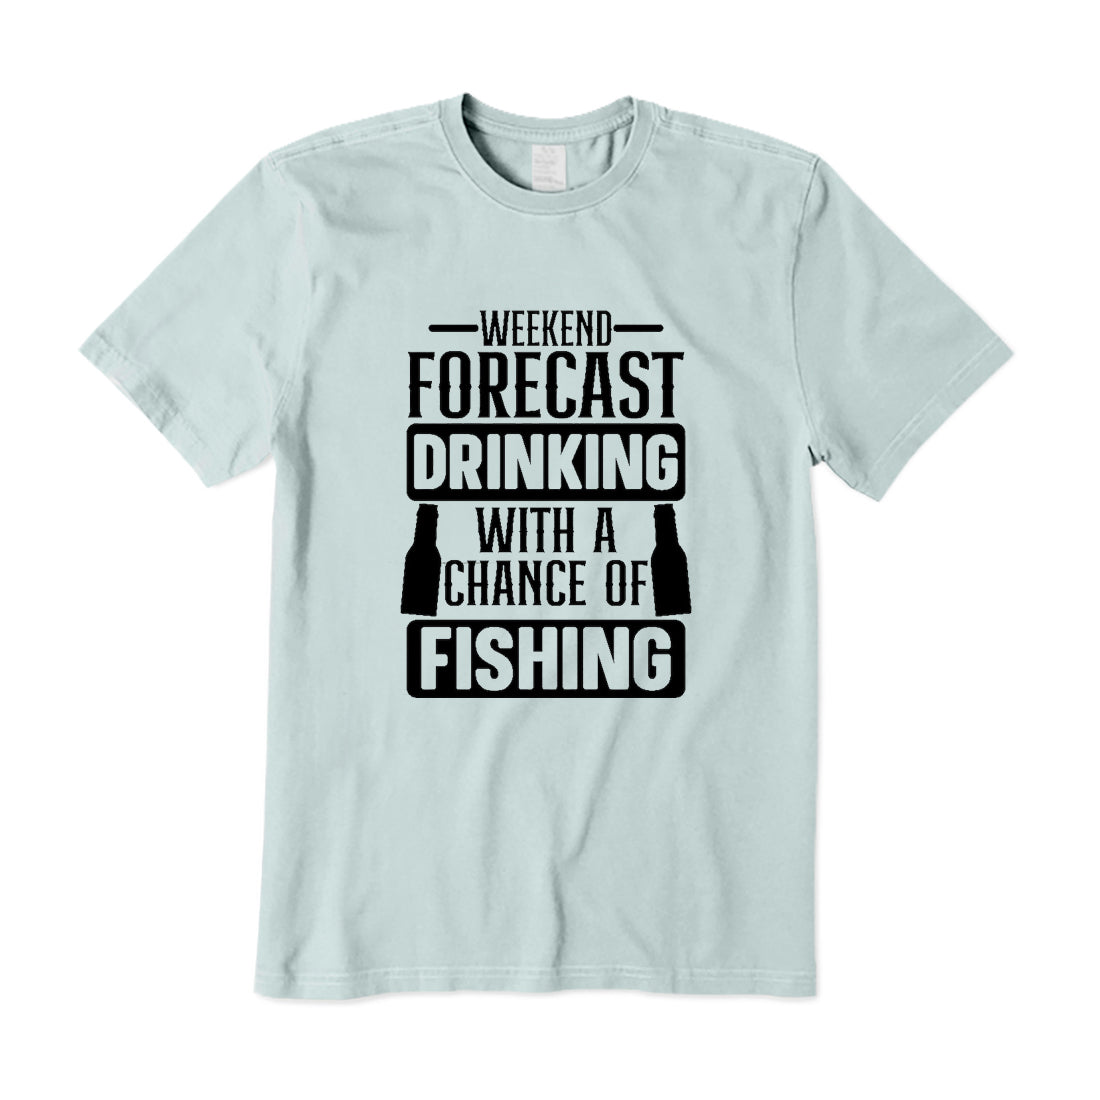 Weekend Forecast Drinking With A Chance Of Fishing T-Shirt